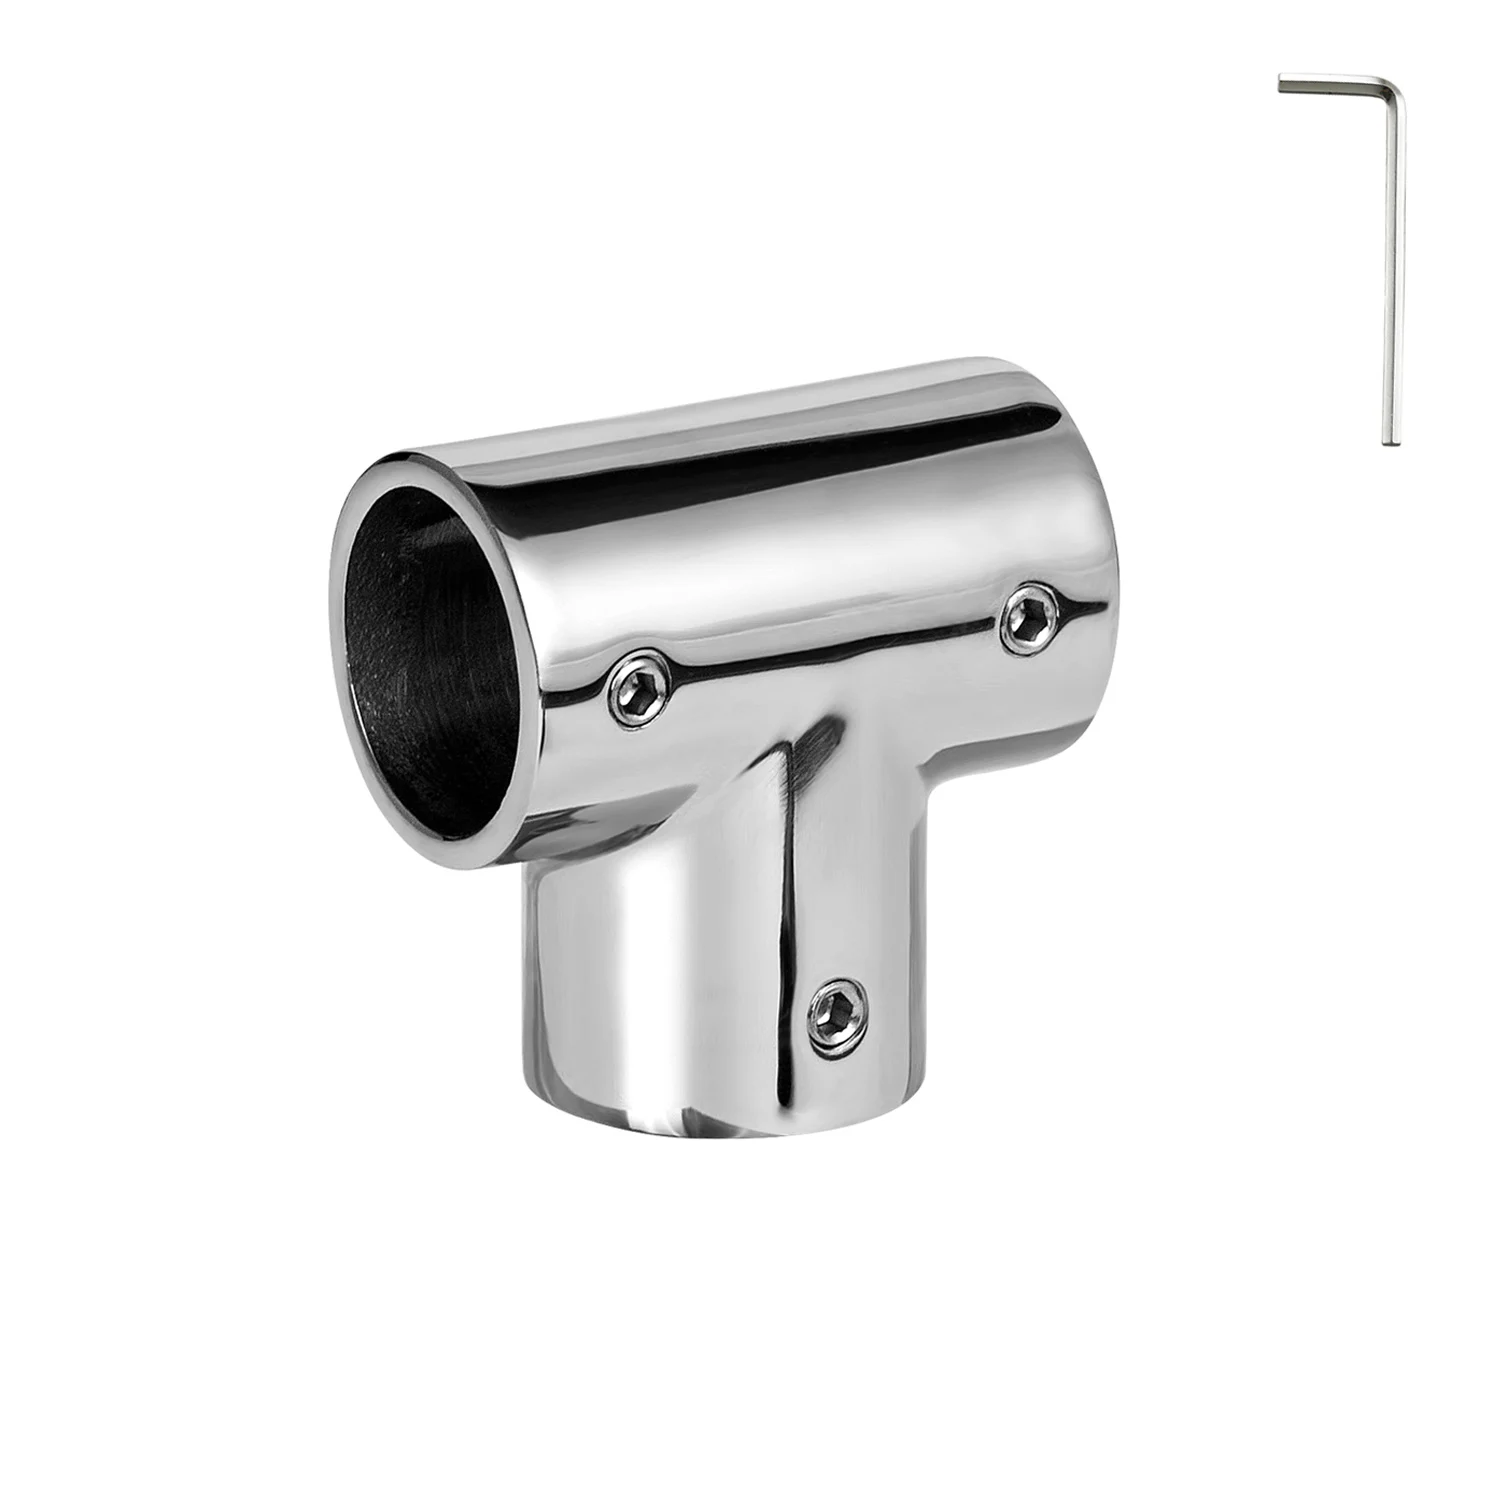 

Boat Handrail Fitting 90 Degree Tee Rail for 7/8" Tubing, Heavy Duty, 316 Stainless Steel, Marine Boat Railing Tee Connector